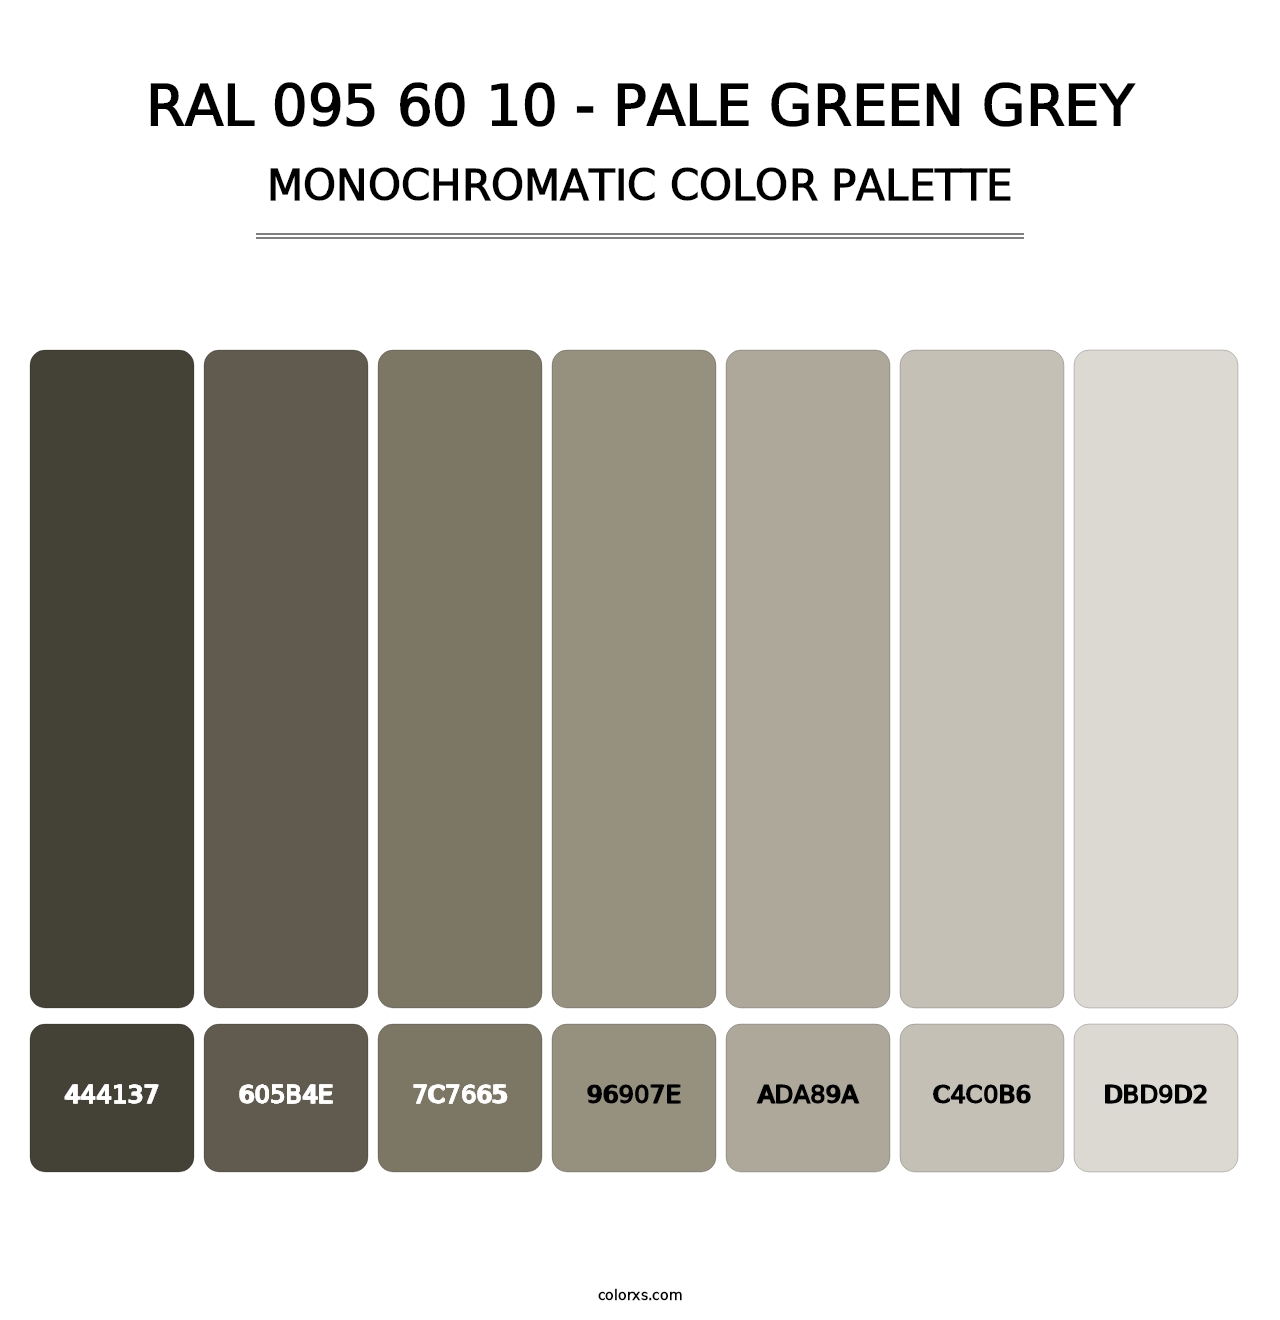 RAL 095 60 10 - Pale Green Grey - Monochromatic Color Palette